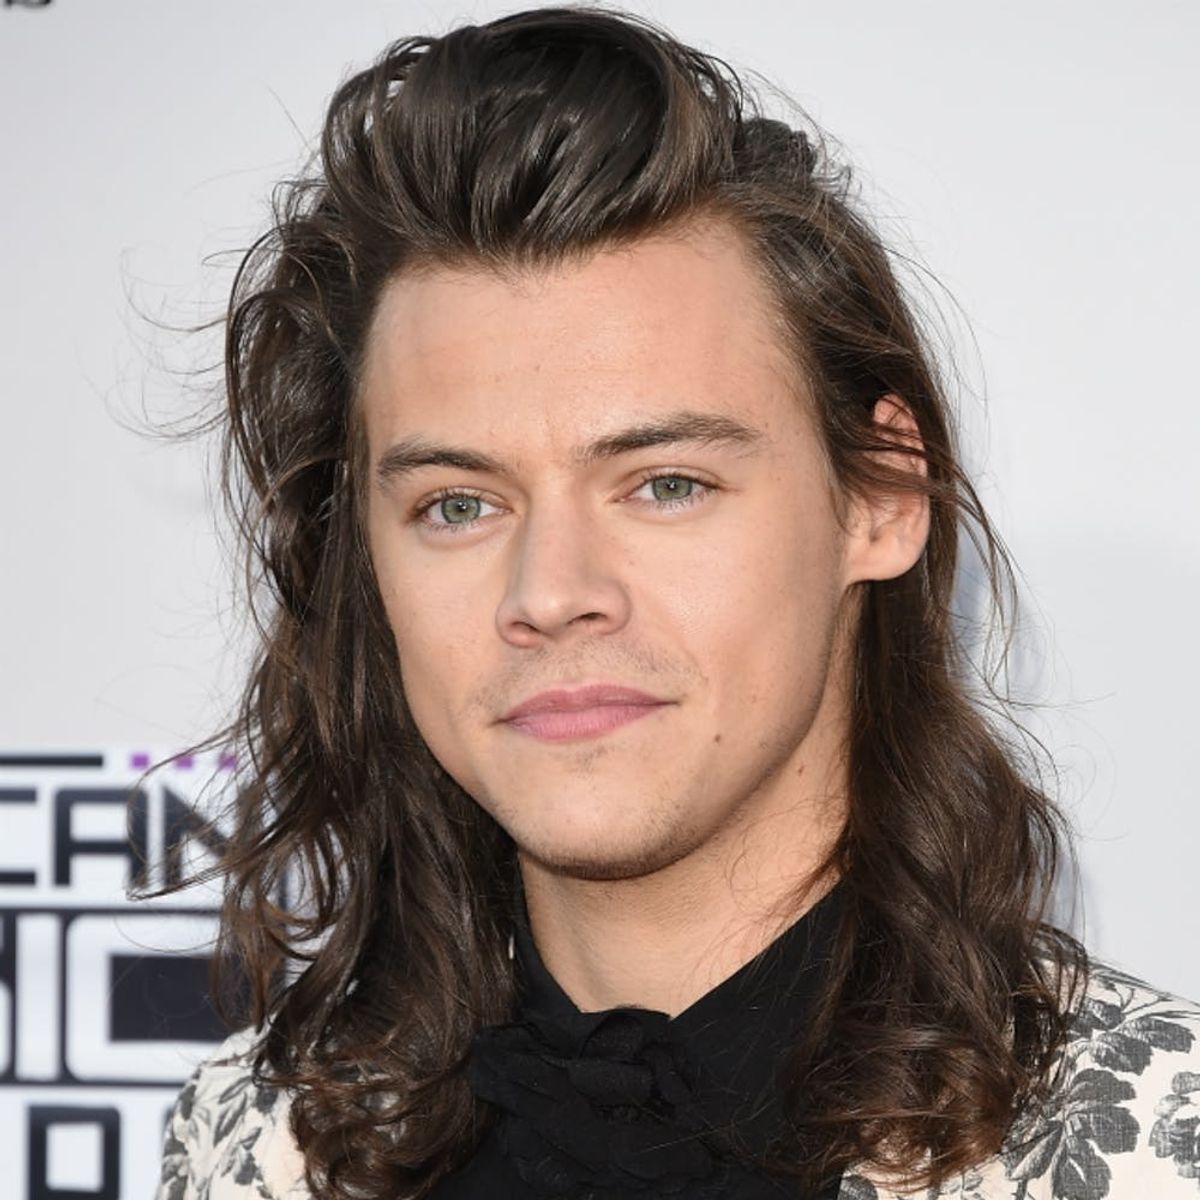 The Reason People Think This Is Harry Styles’ New Girlfriend Is Totally Misleading